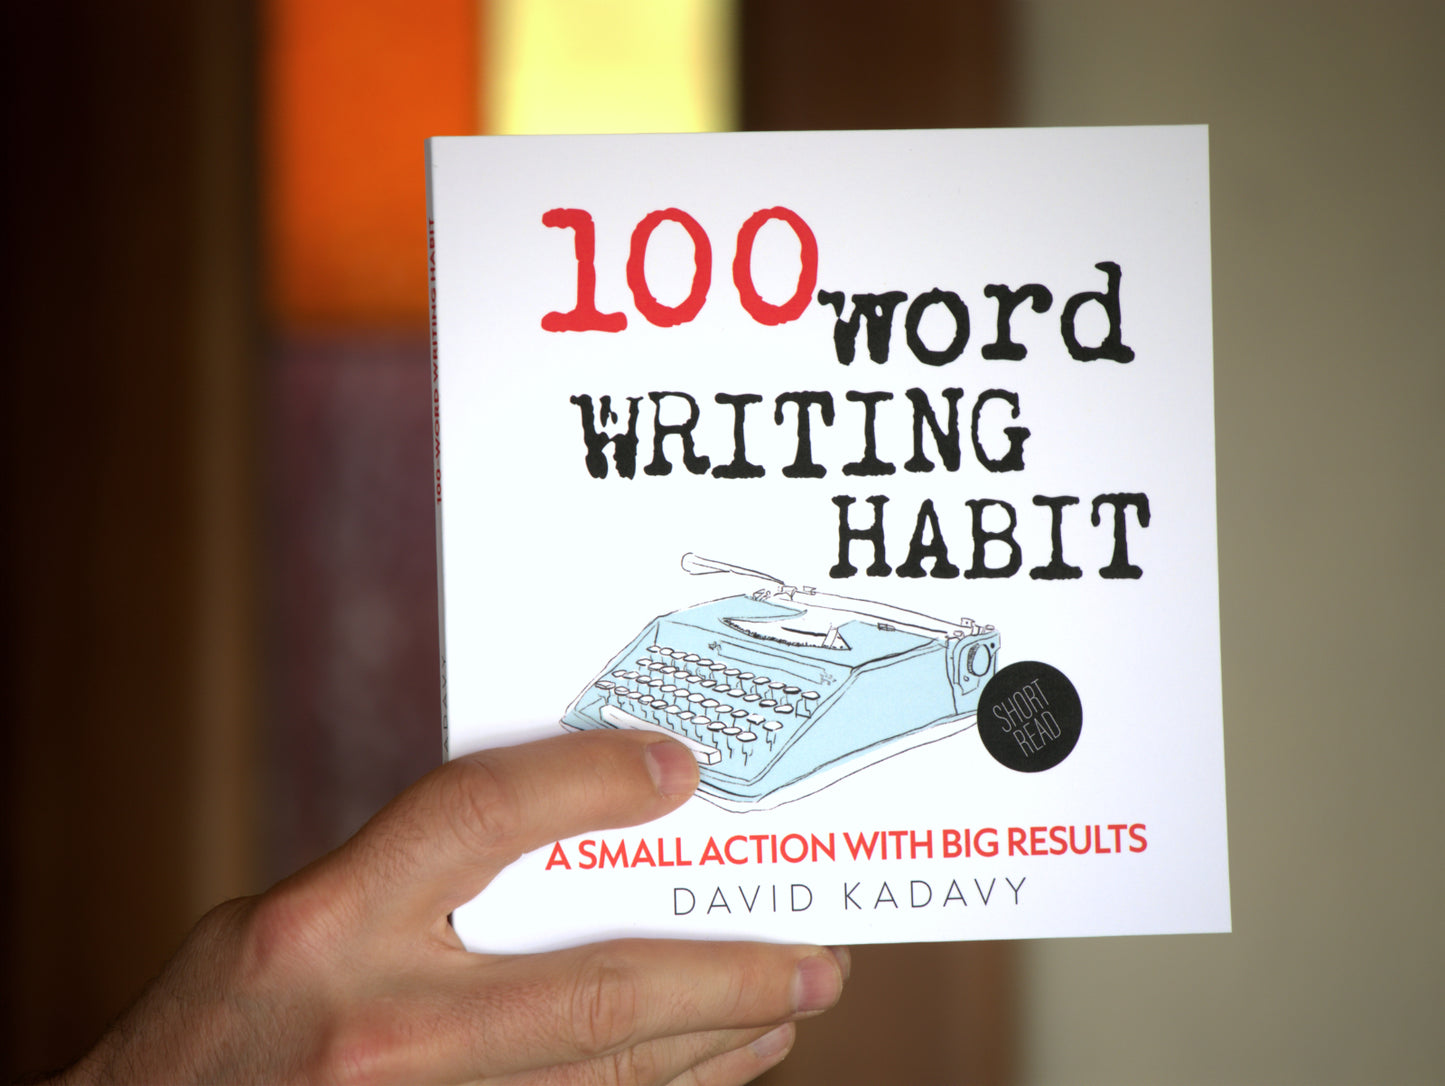 100-Word Writing Habit: A Small Action With Big Results (Short Read)